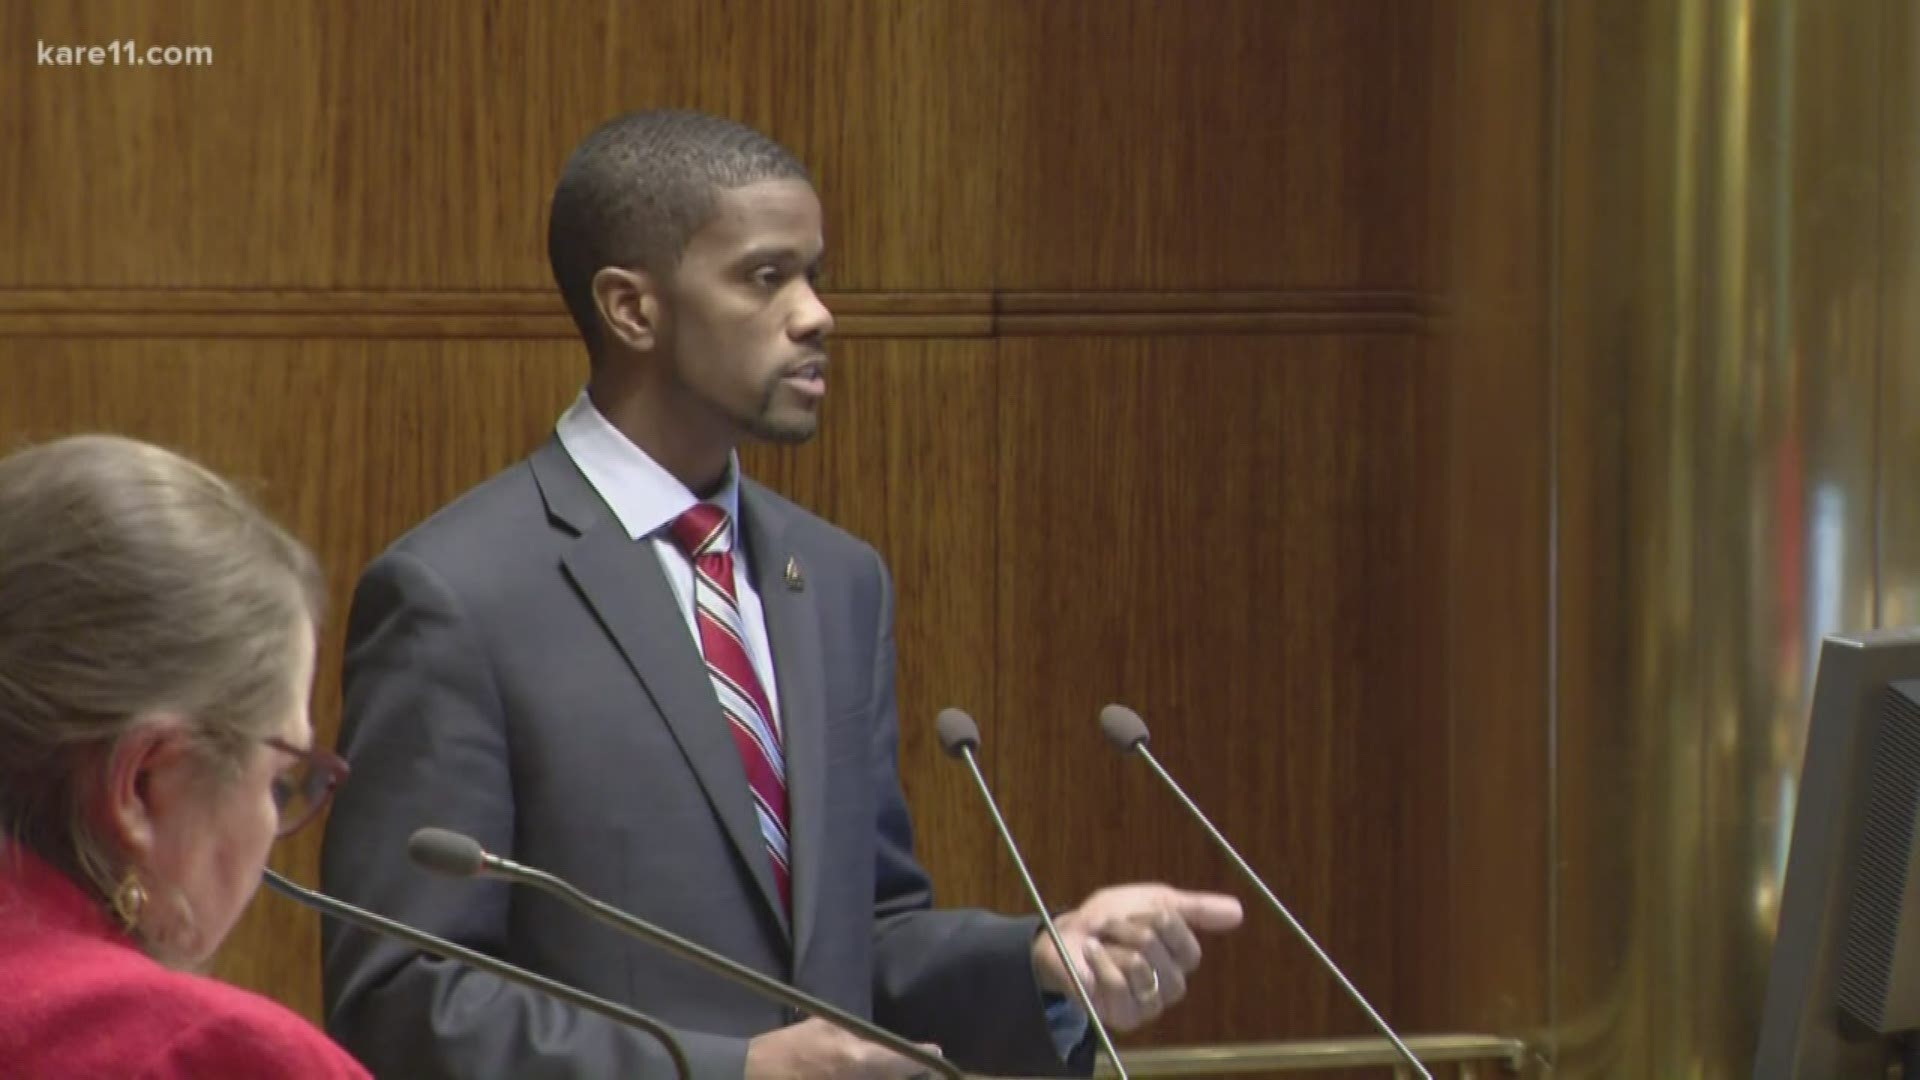 St. Paul Mayor Melvin Carter is asking for an additional $1.5 million dollars in public safety funding on the heels of a spike in homicides.